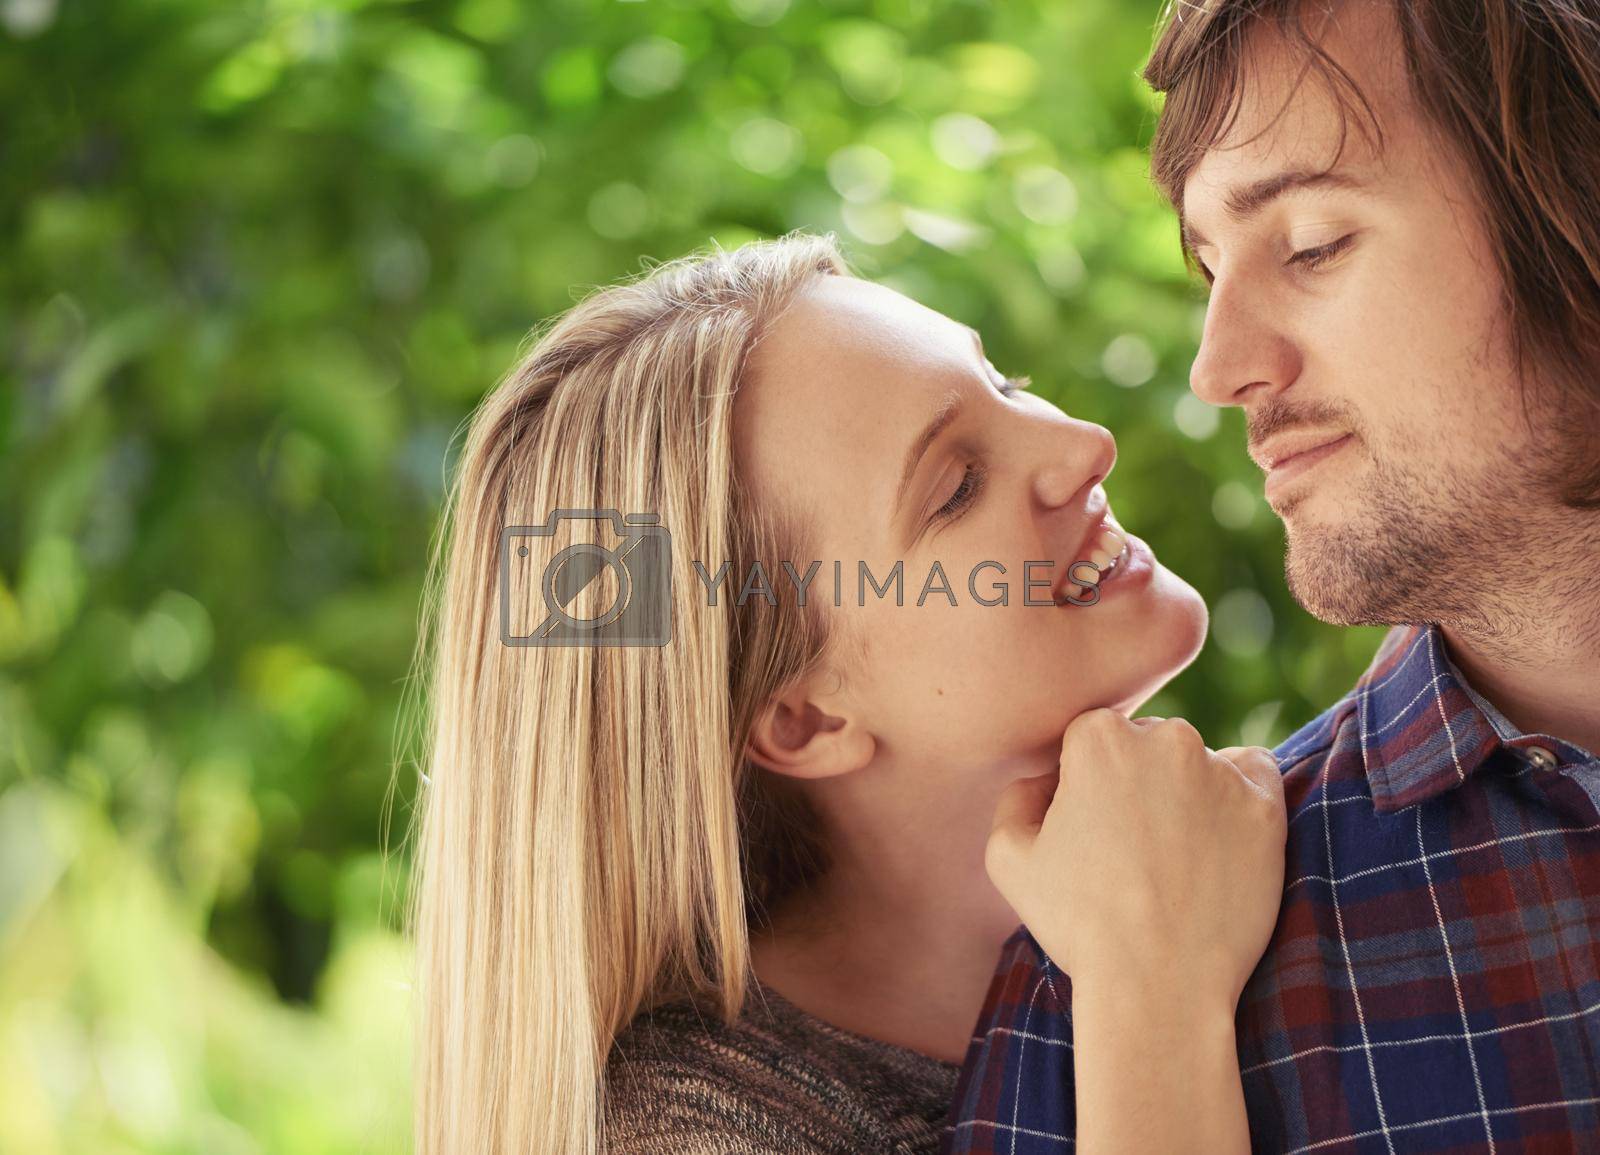 Royalty free image of Young and filled with passion. Portrait of a smiling young couple hugging each other in the park. by YuriArcurs